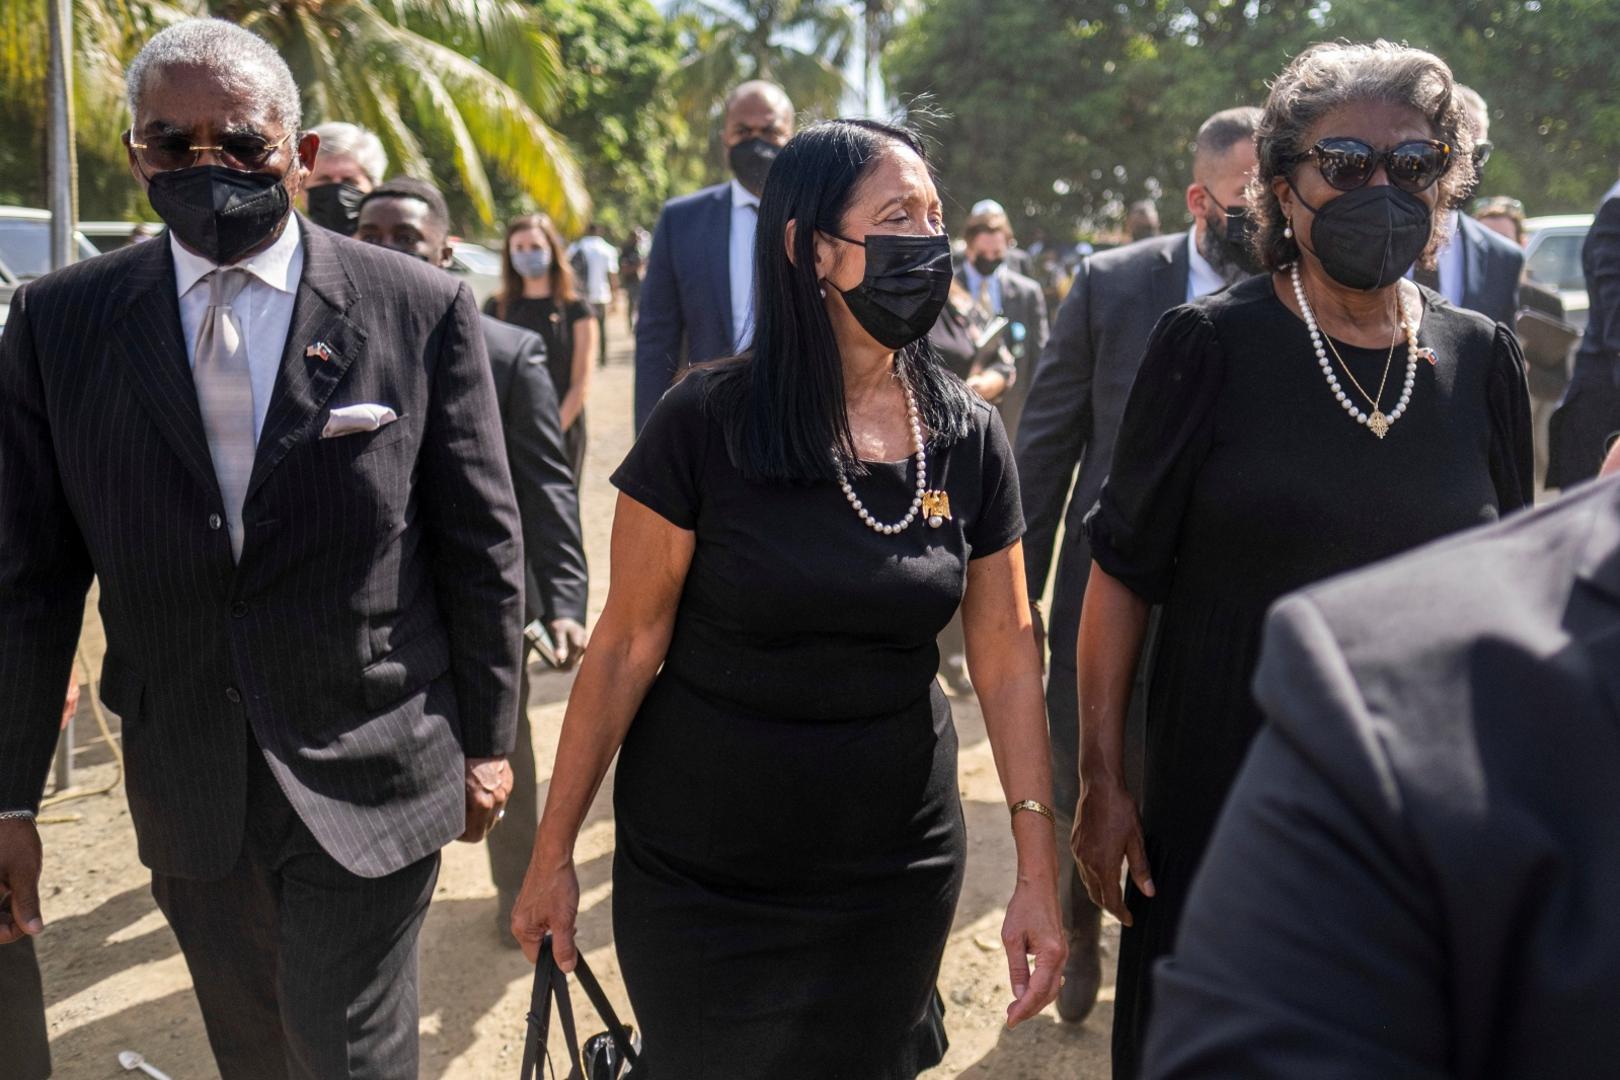 Haiti holds funeral for assassinated President Jovenel Moise in Cap-Haitien U.S. Ambassador to Haiti, Michele J. Sison, arrives for the funeral of late Haitian President Jovenel Moise, who was shot dead earlier this month, at his family home in Cap-Haitien, Haiti, July 23, 2021. REUTERS/Ricardo Arduengo RICARDO ARDUENGO